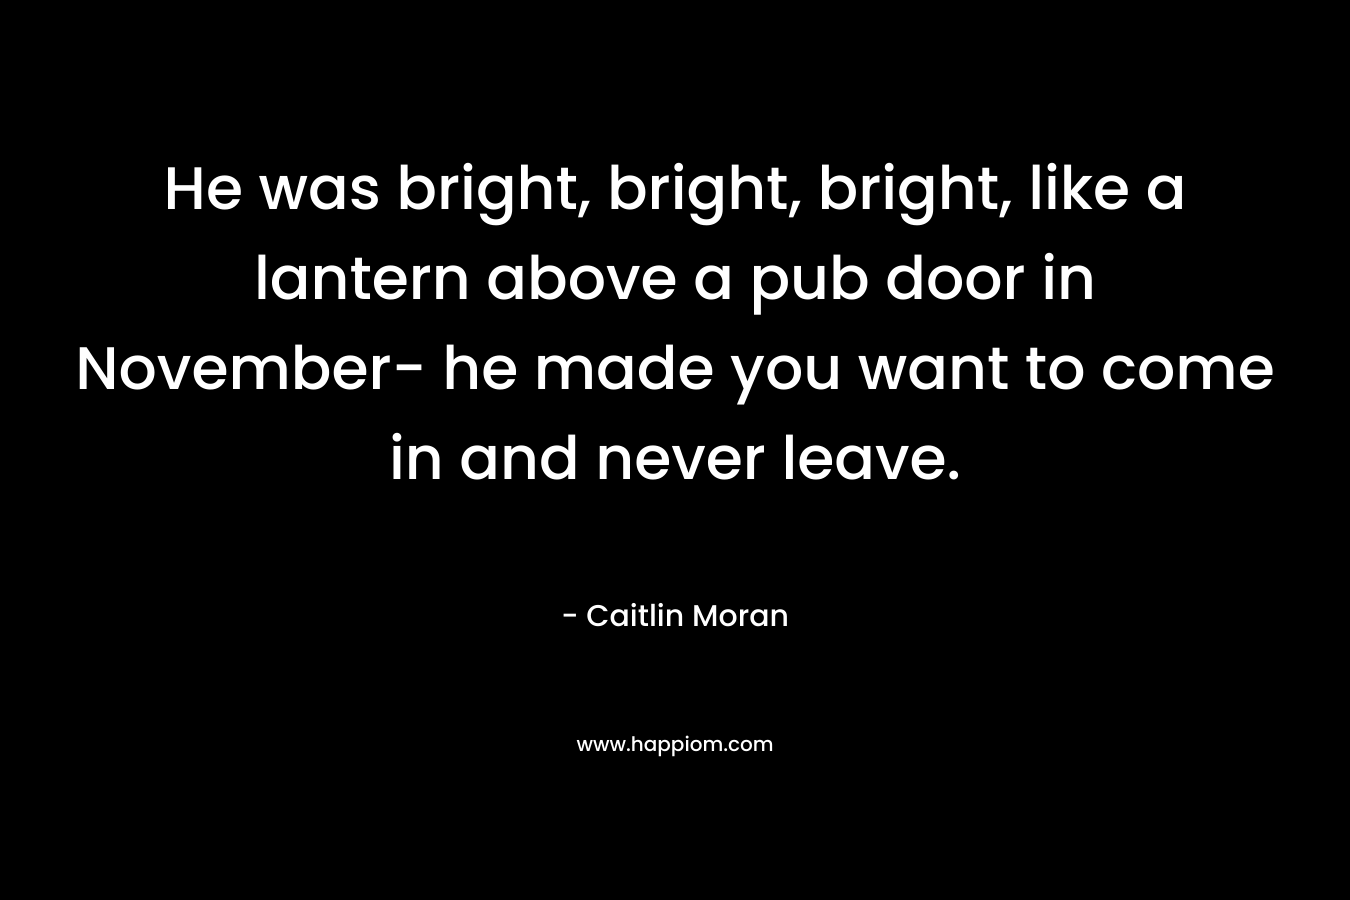 He was bright, bright, bright, like a lantern above a pub door in November- he made you want to come in and never leave.